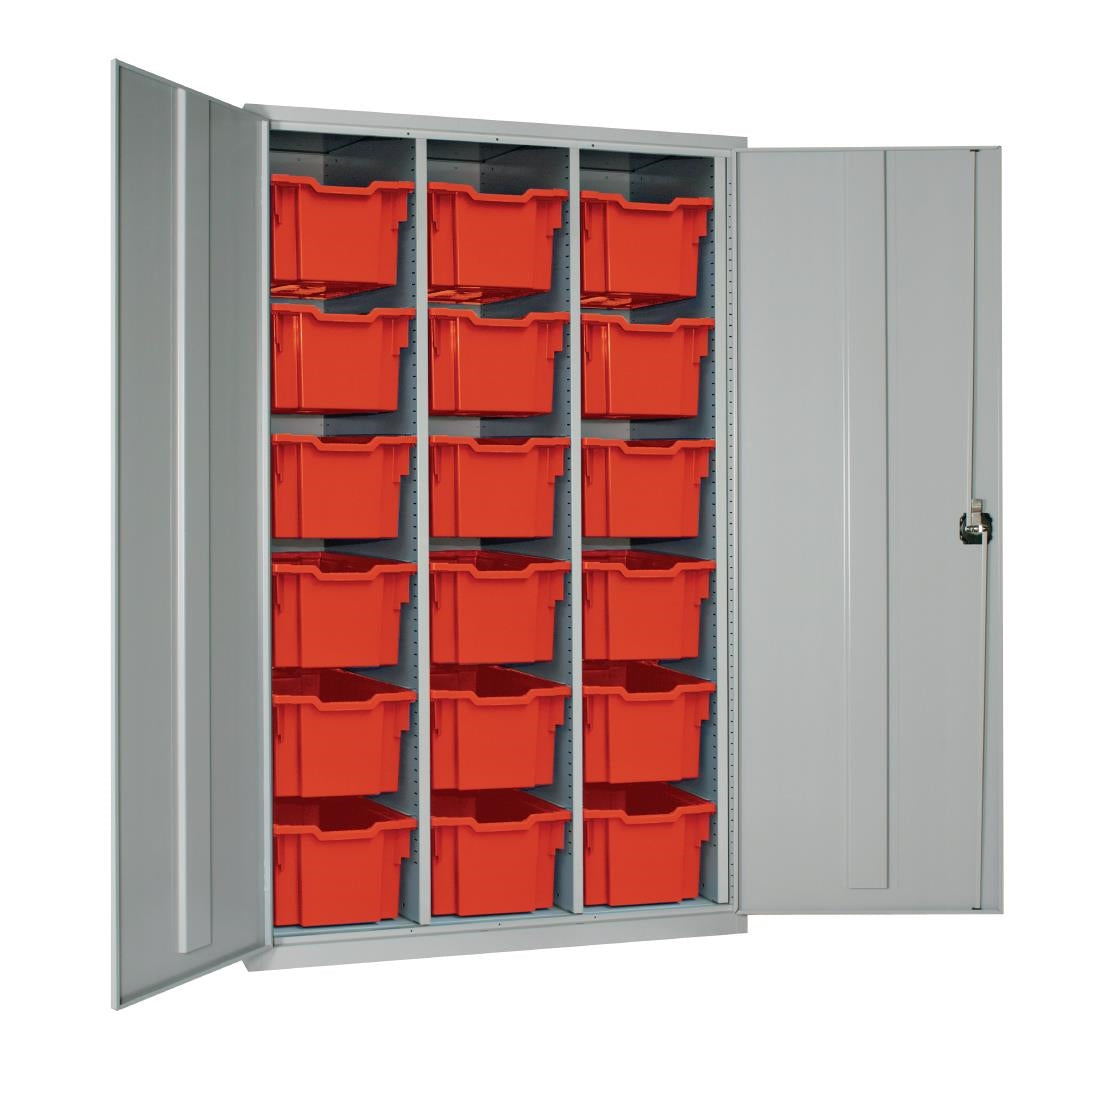 18 Tray High-Capacity Storage Cupboard - Grey with Red Trays